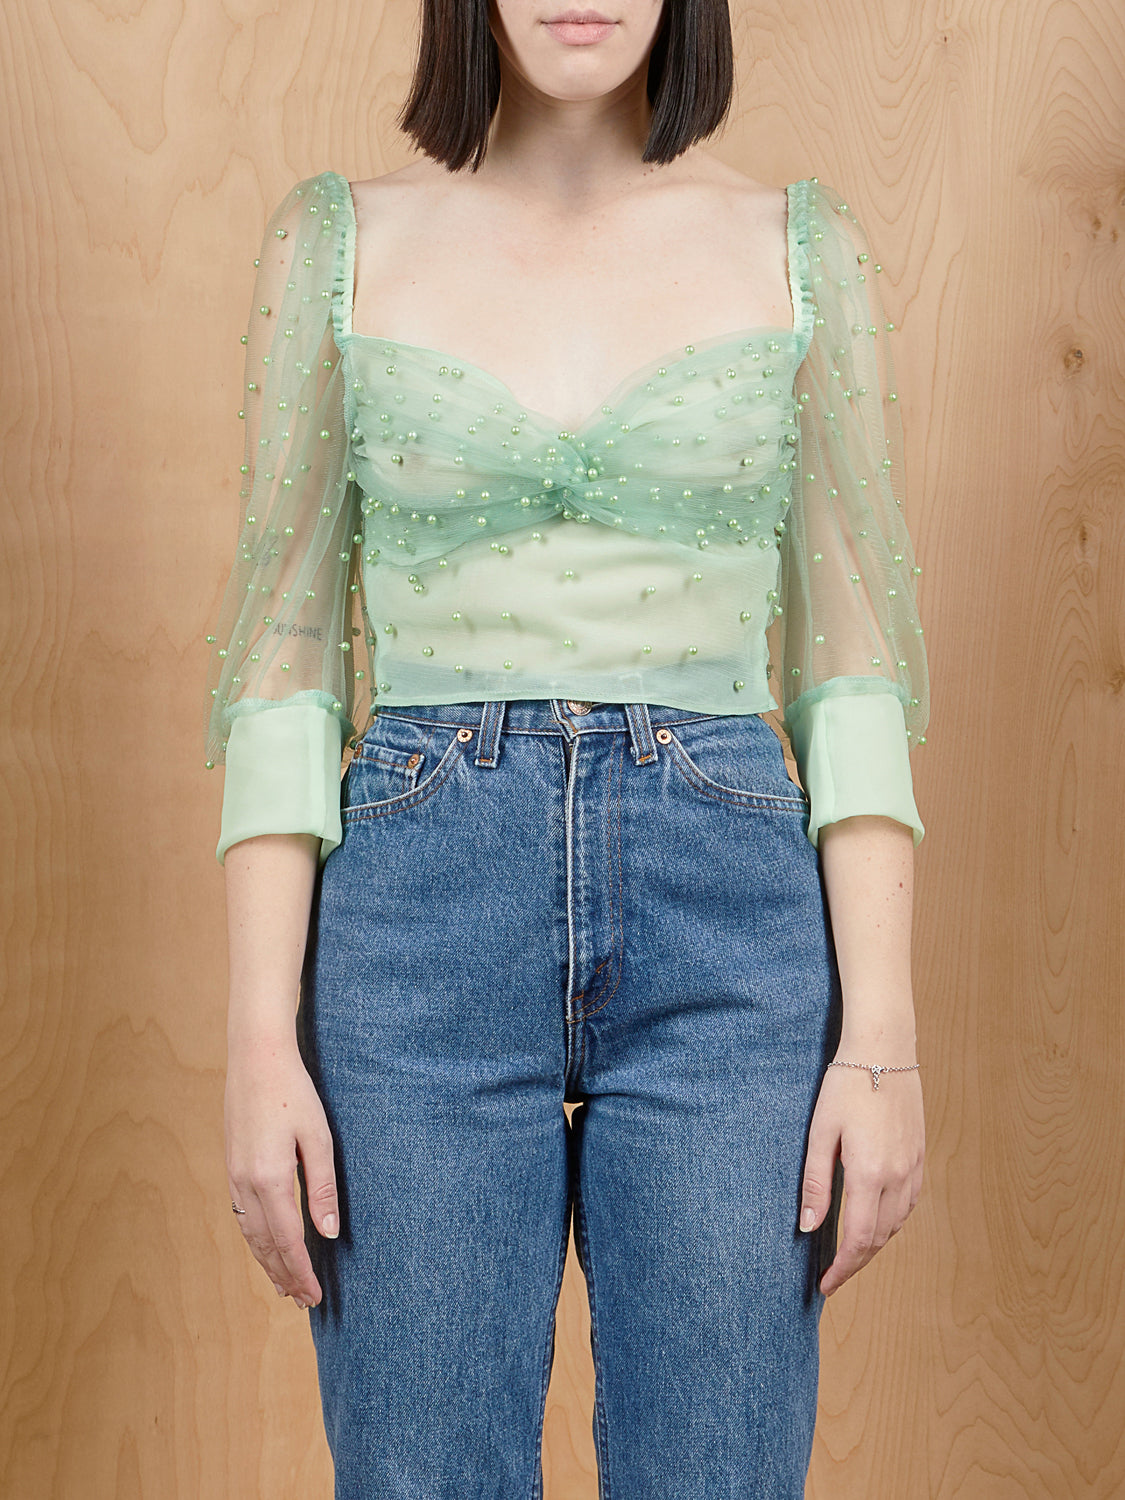 Tach Clothing Mint Beaded Crop Top